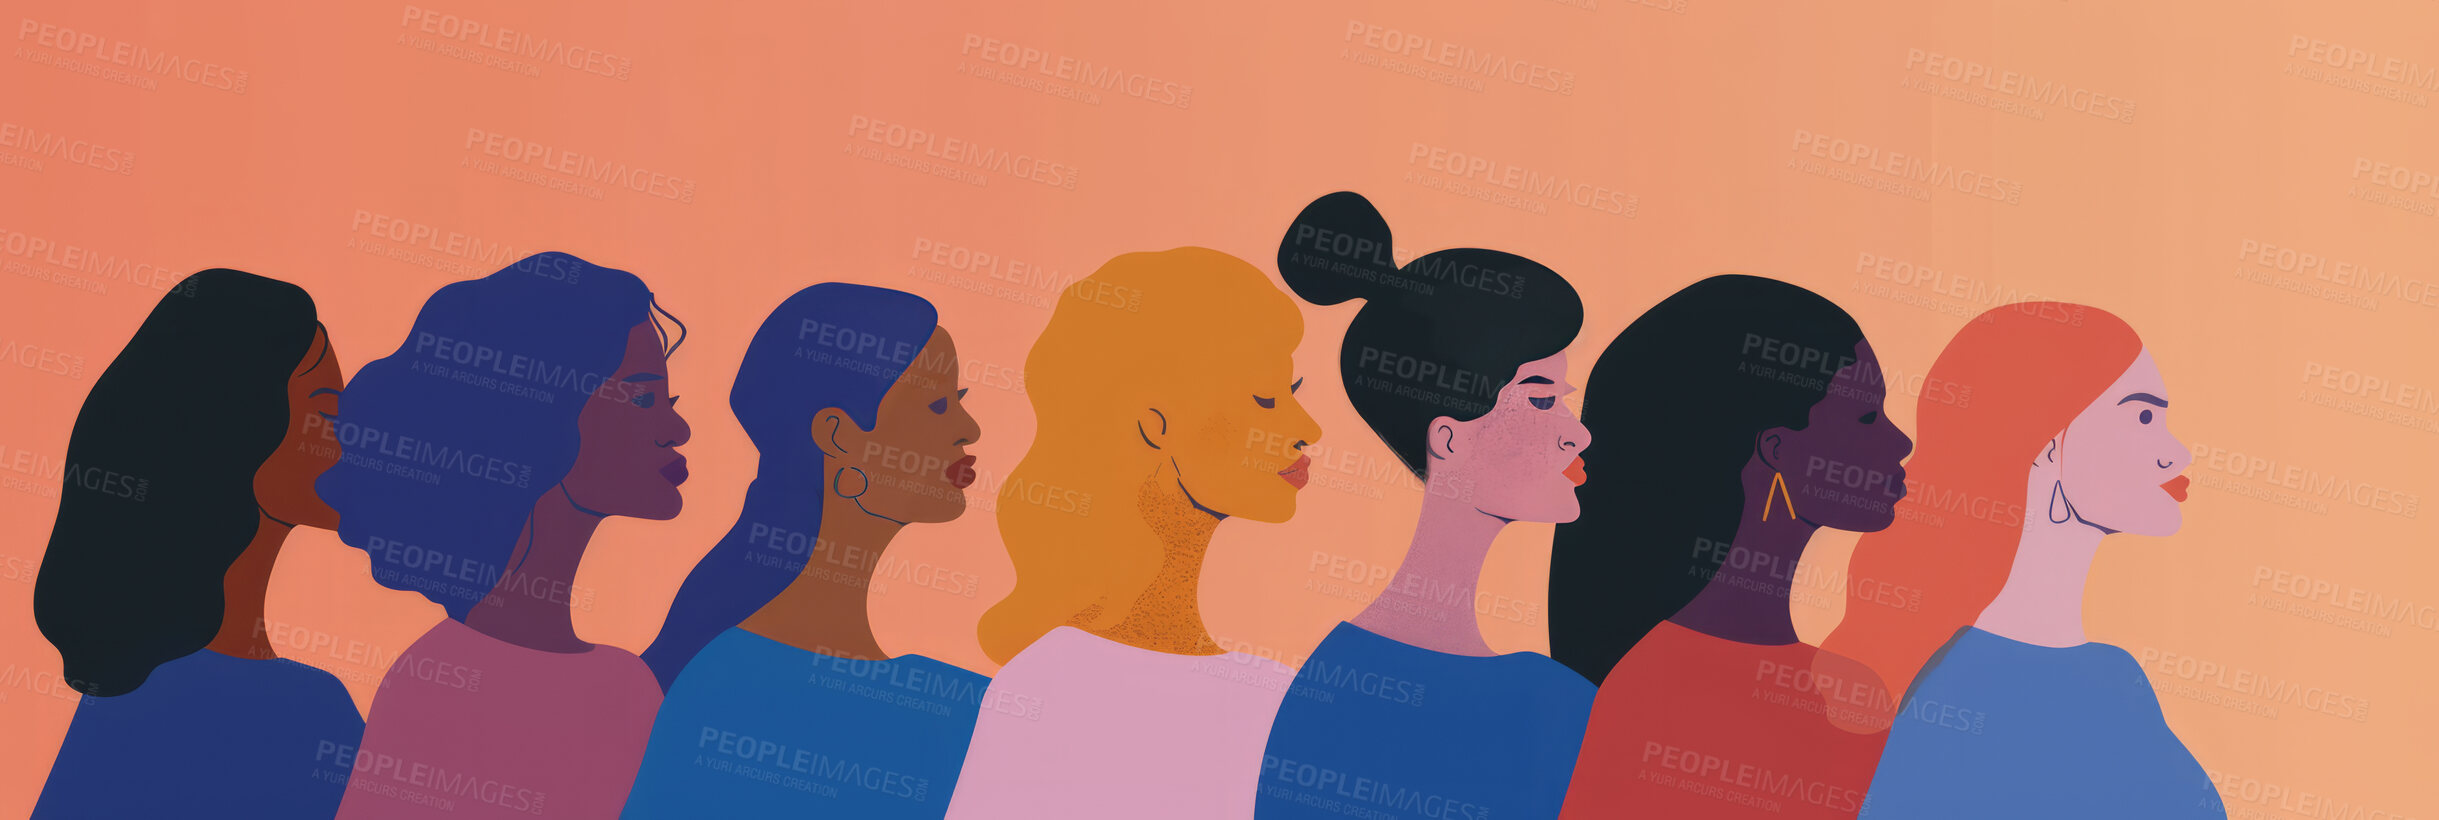 Buy stock photo Diversity, freedom and equality with a group of woman together in a crowd or illustration as a poster. Peace, community or human rights with an image of different people and women on a color backdrop